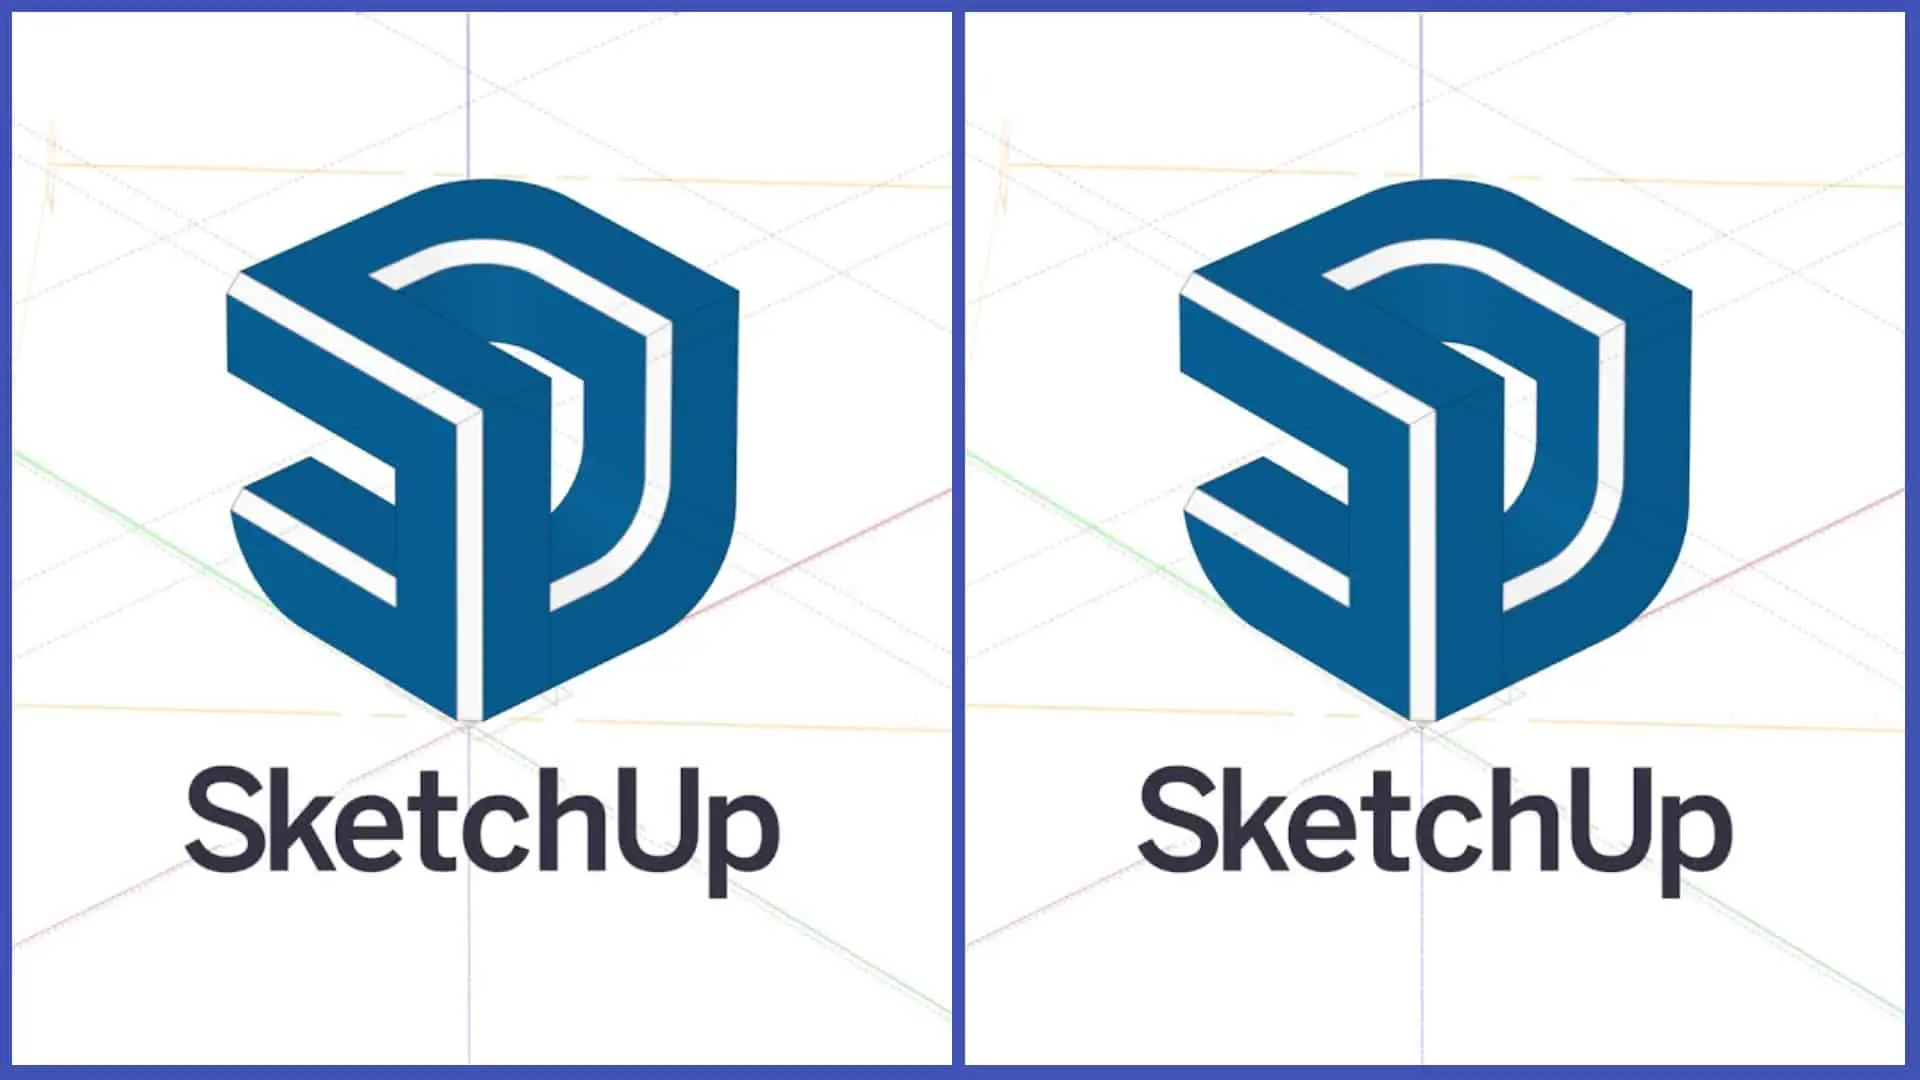 Who Owns SketchUp?